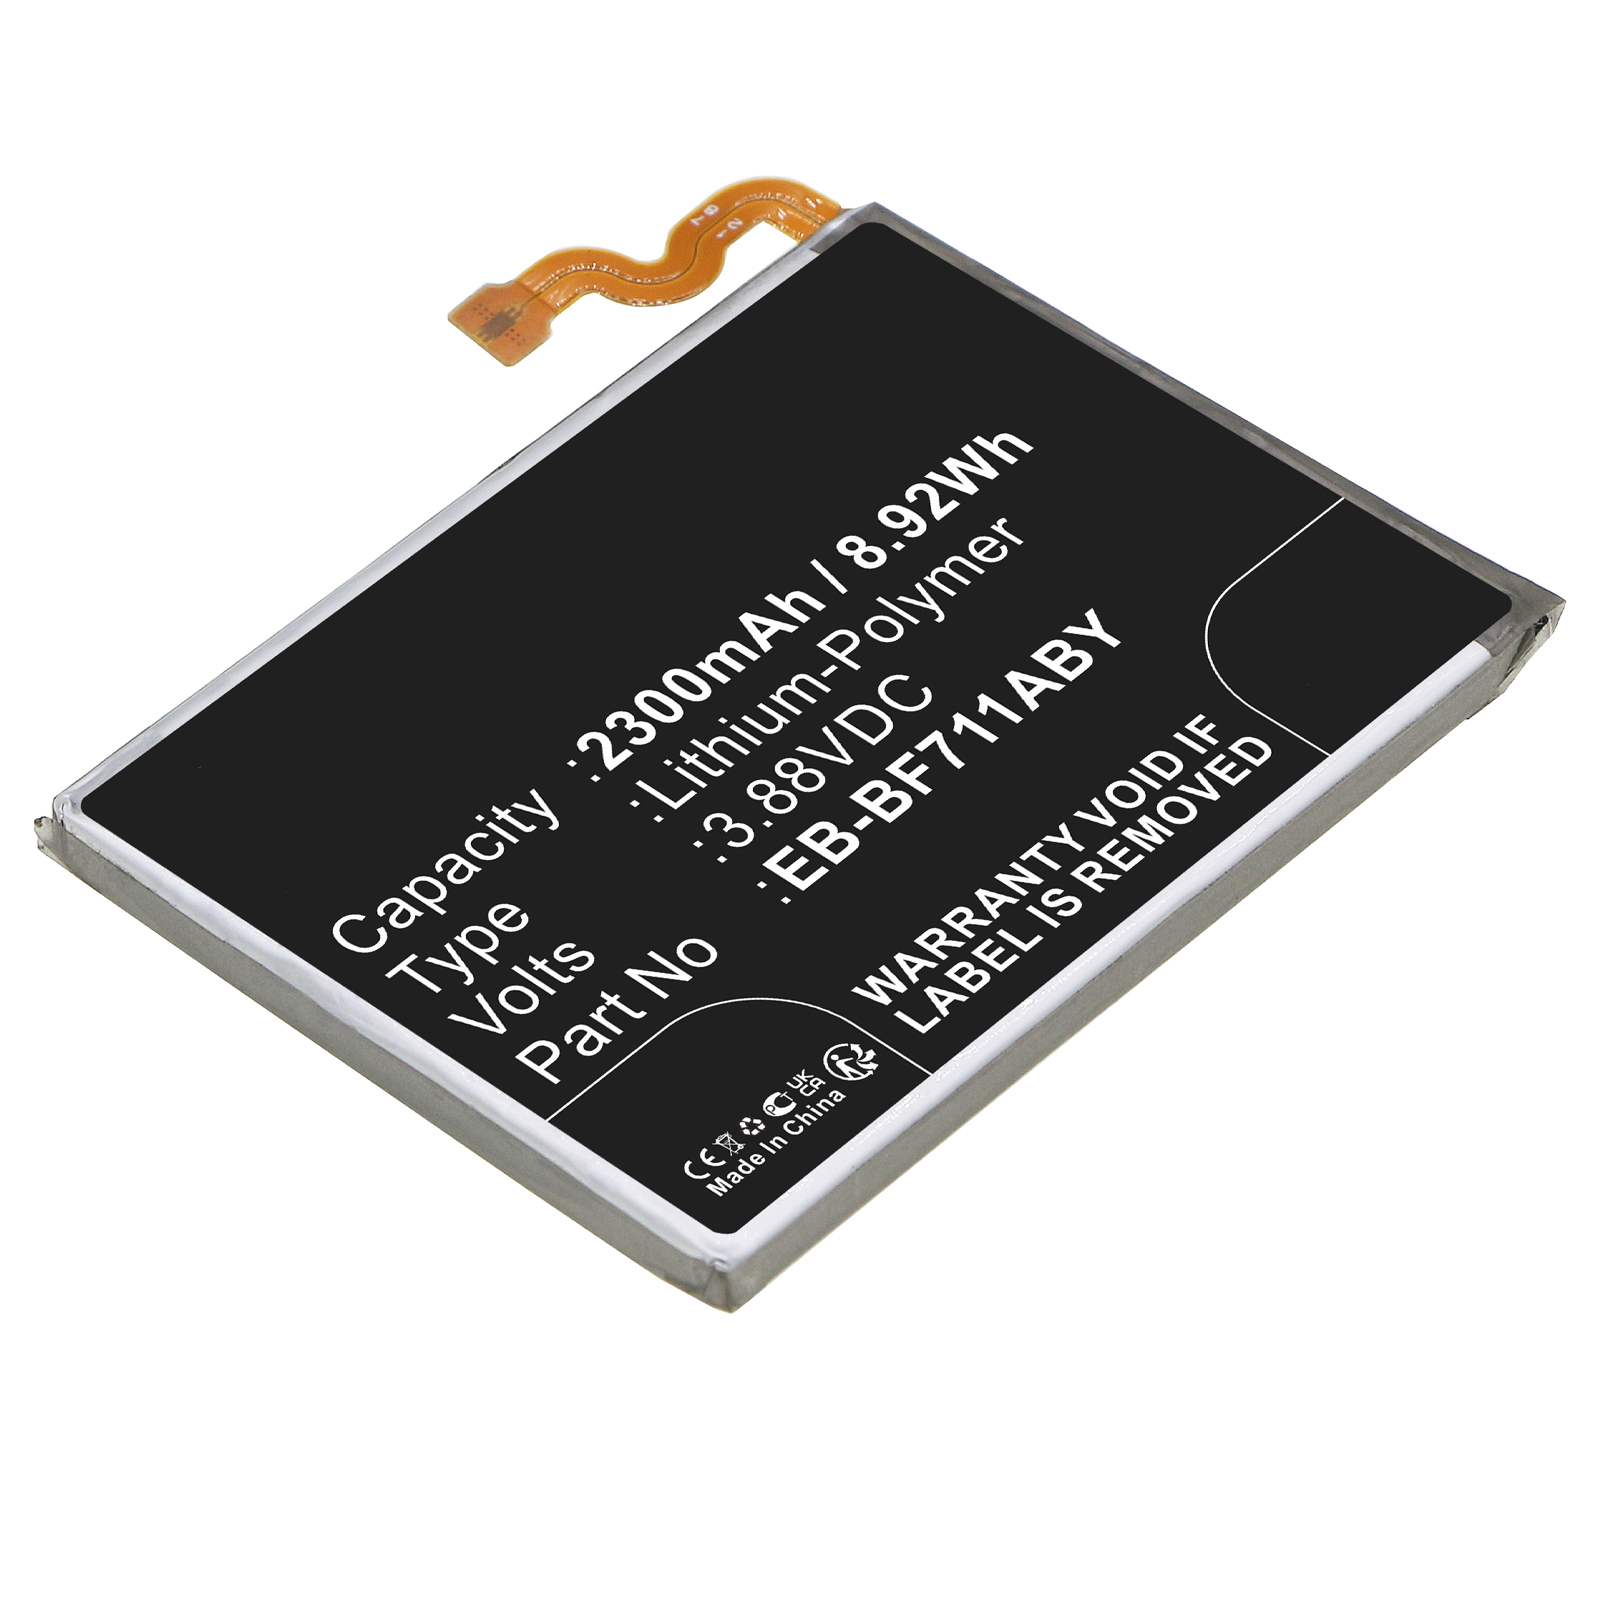 Synergy Digital Cell Phone Battery, Compatible with Samsung EB-BF711ABY Cell Phone Battery (Li-Pol, 3.88V, 2300mAh)